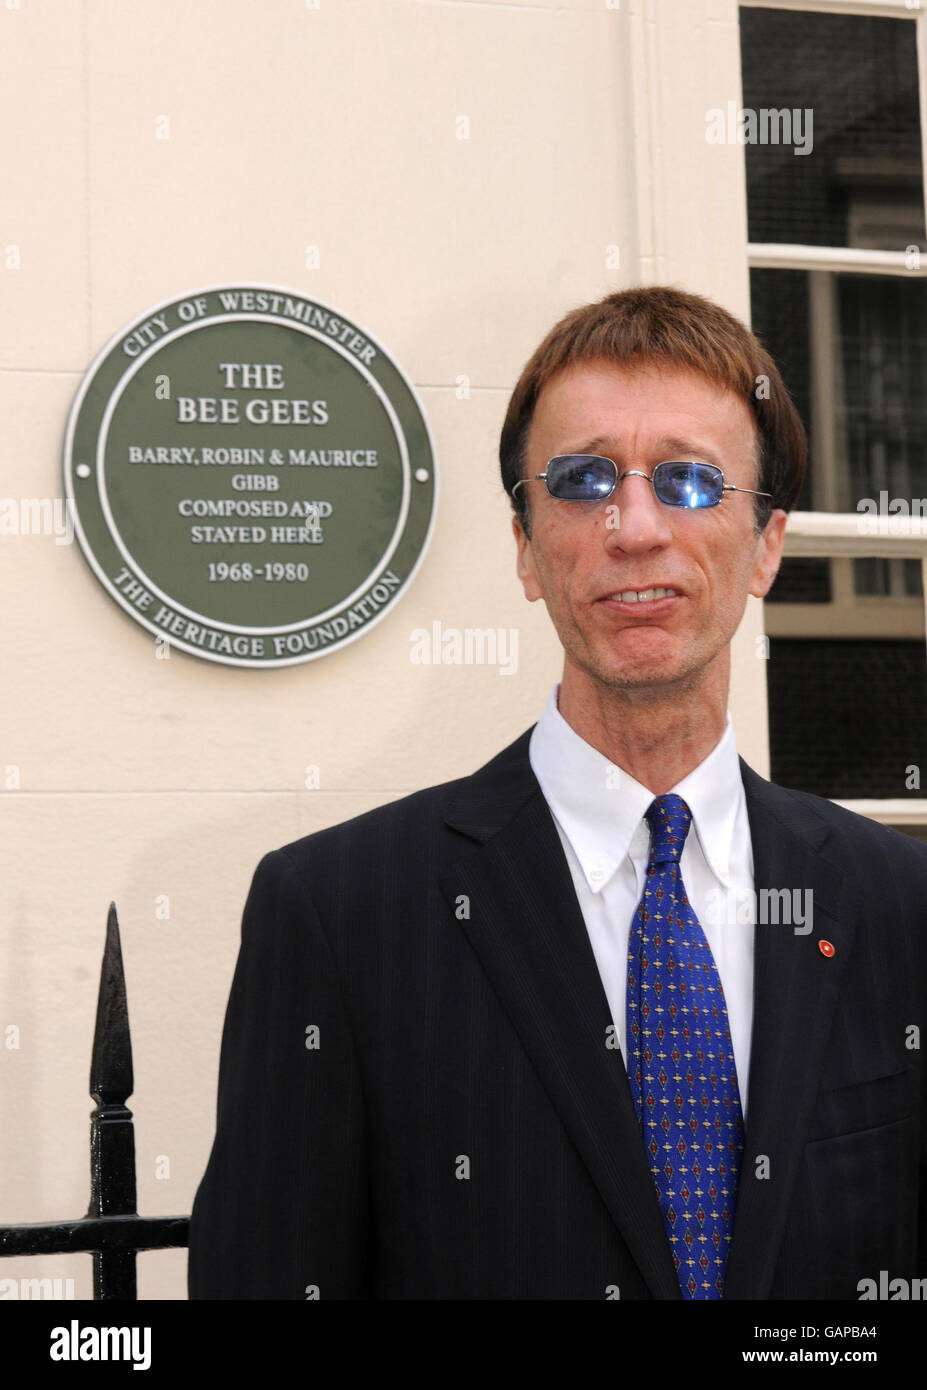 Robin Gibb, founding member of the Bee Gees, unveils a plaque honouring the work of the Bee Gees at 67 Brook Street, central London. Stock Photo